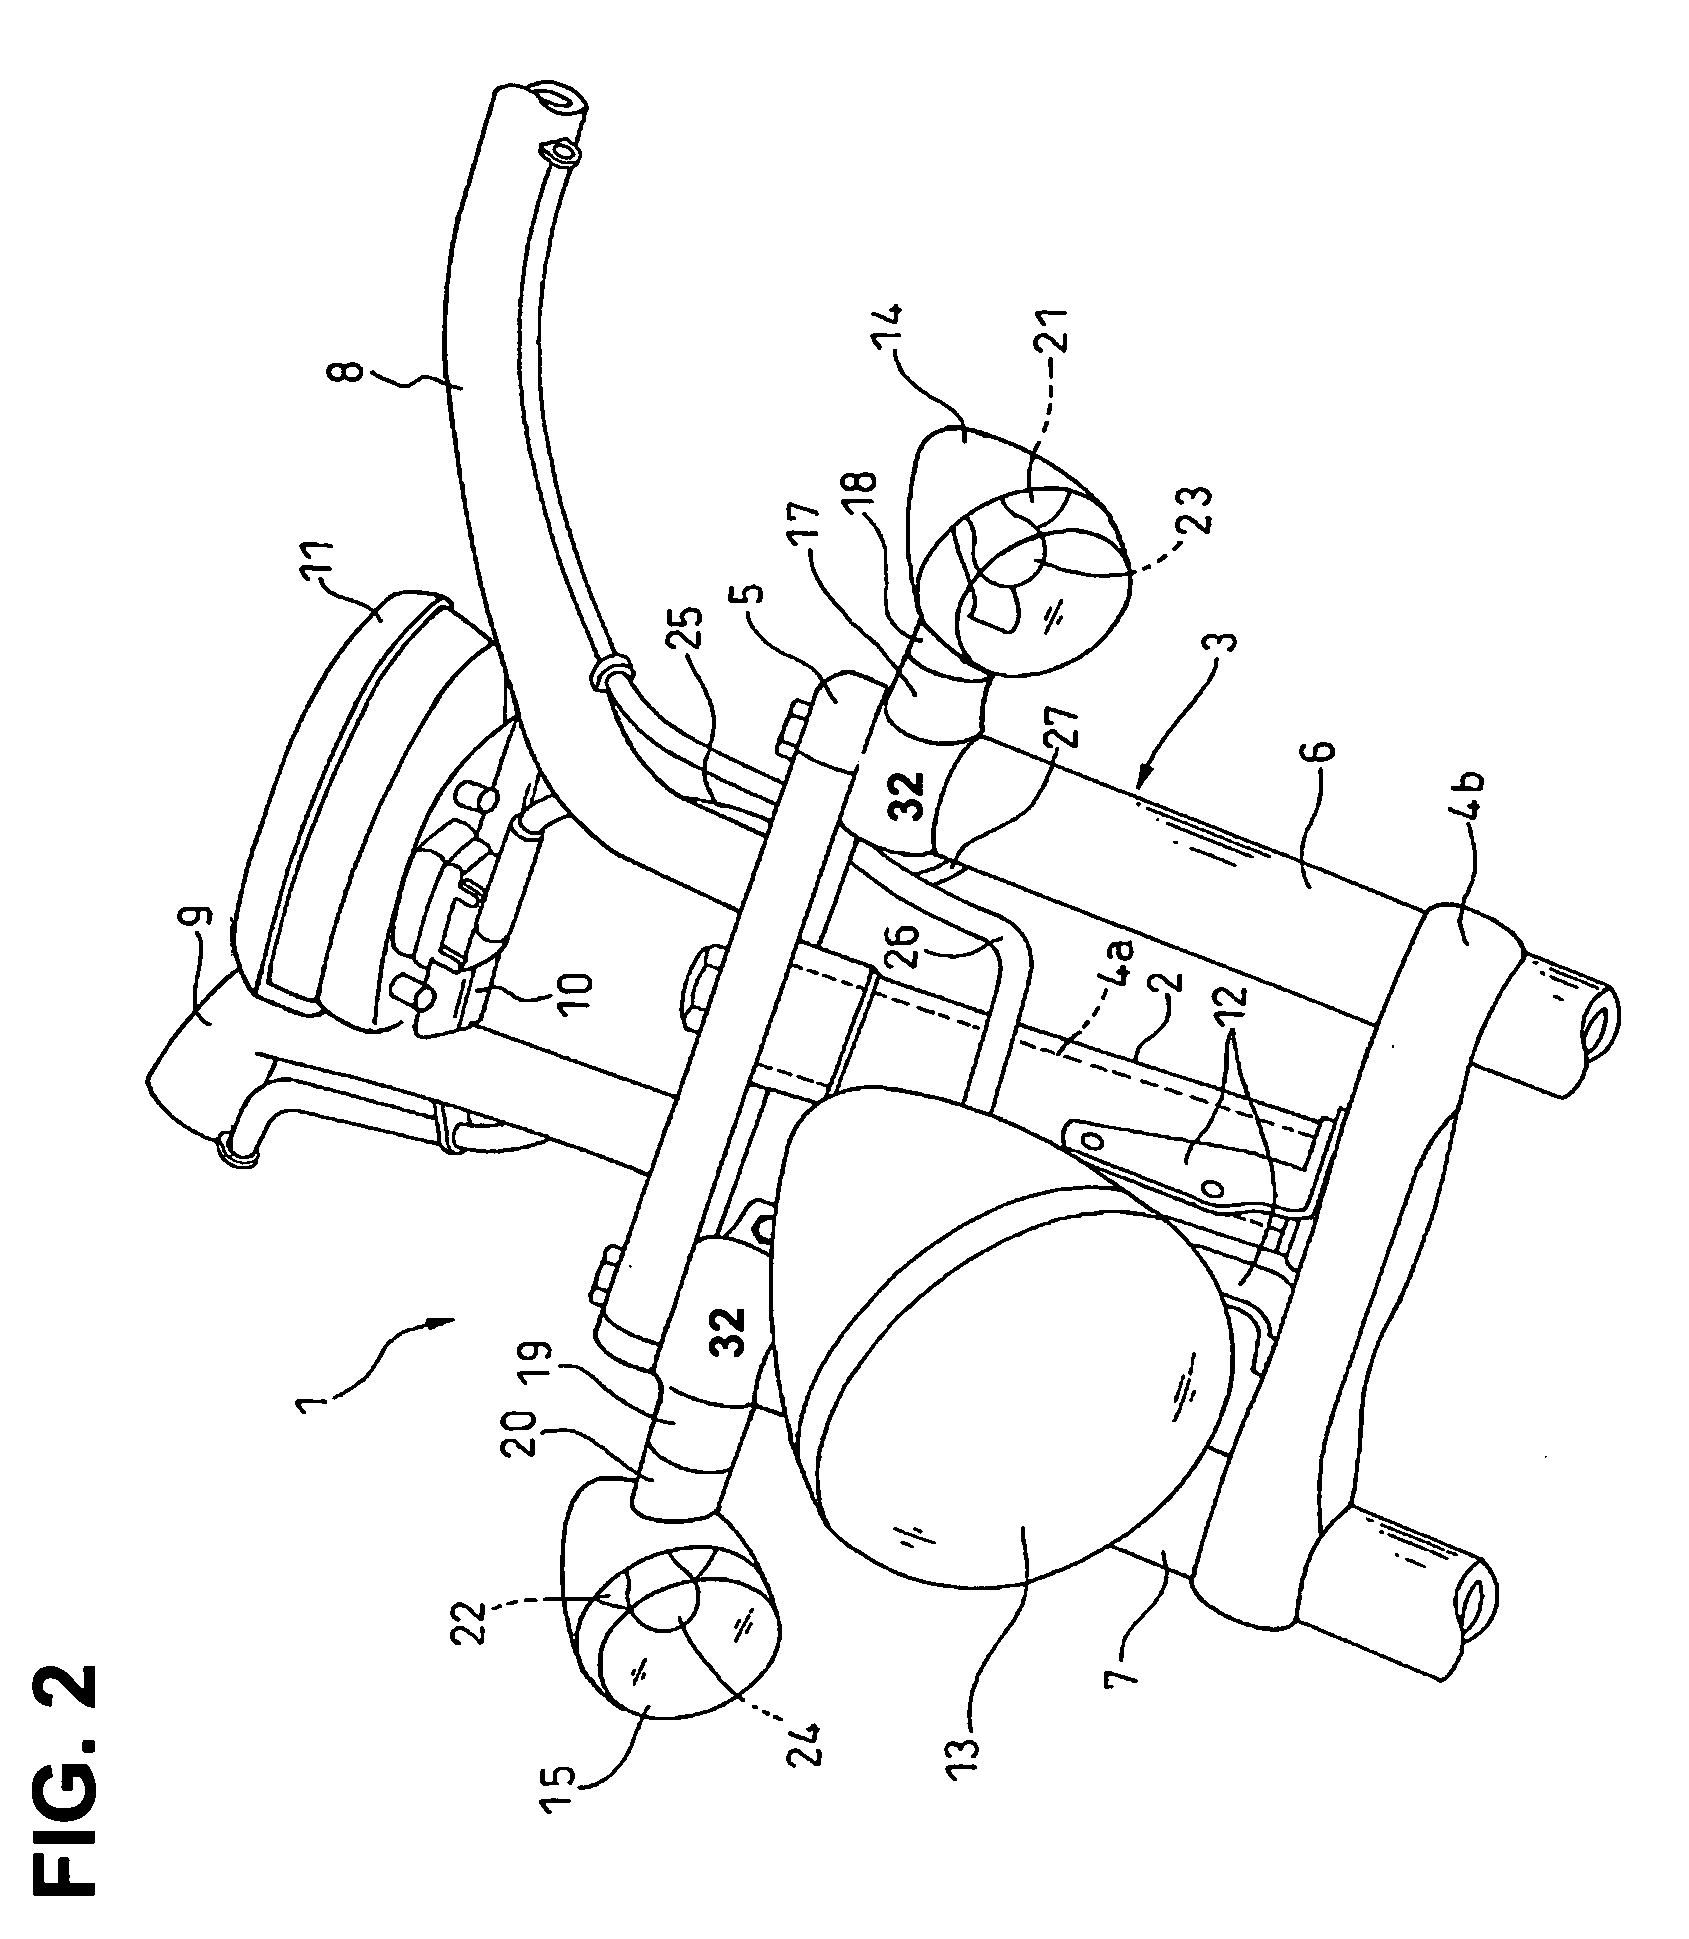 Turn signal indicator lamp apparatus for a motorcycle, and motorcycle including same